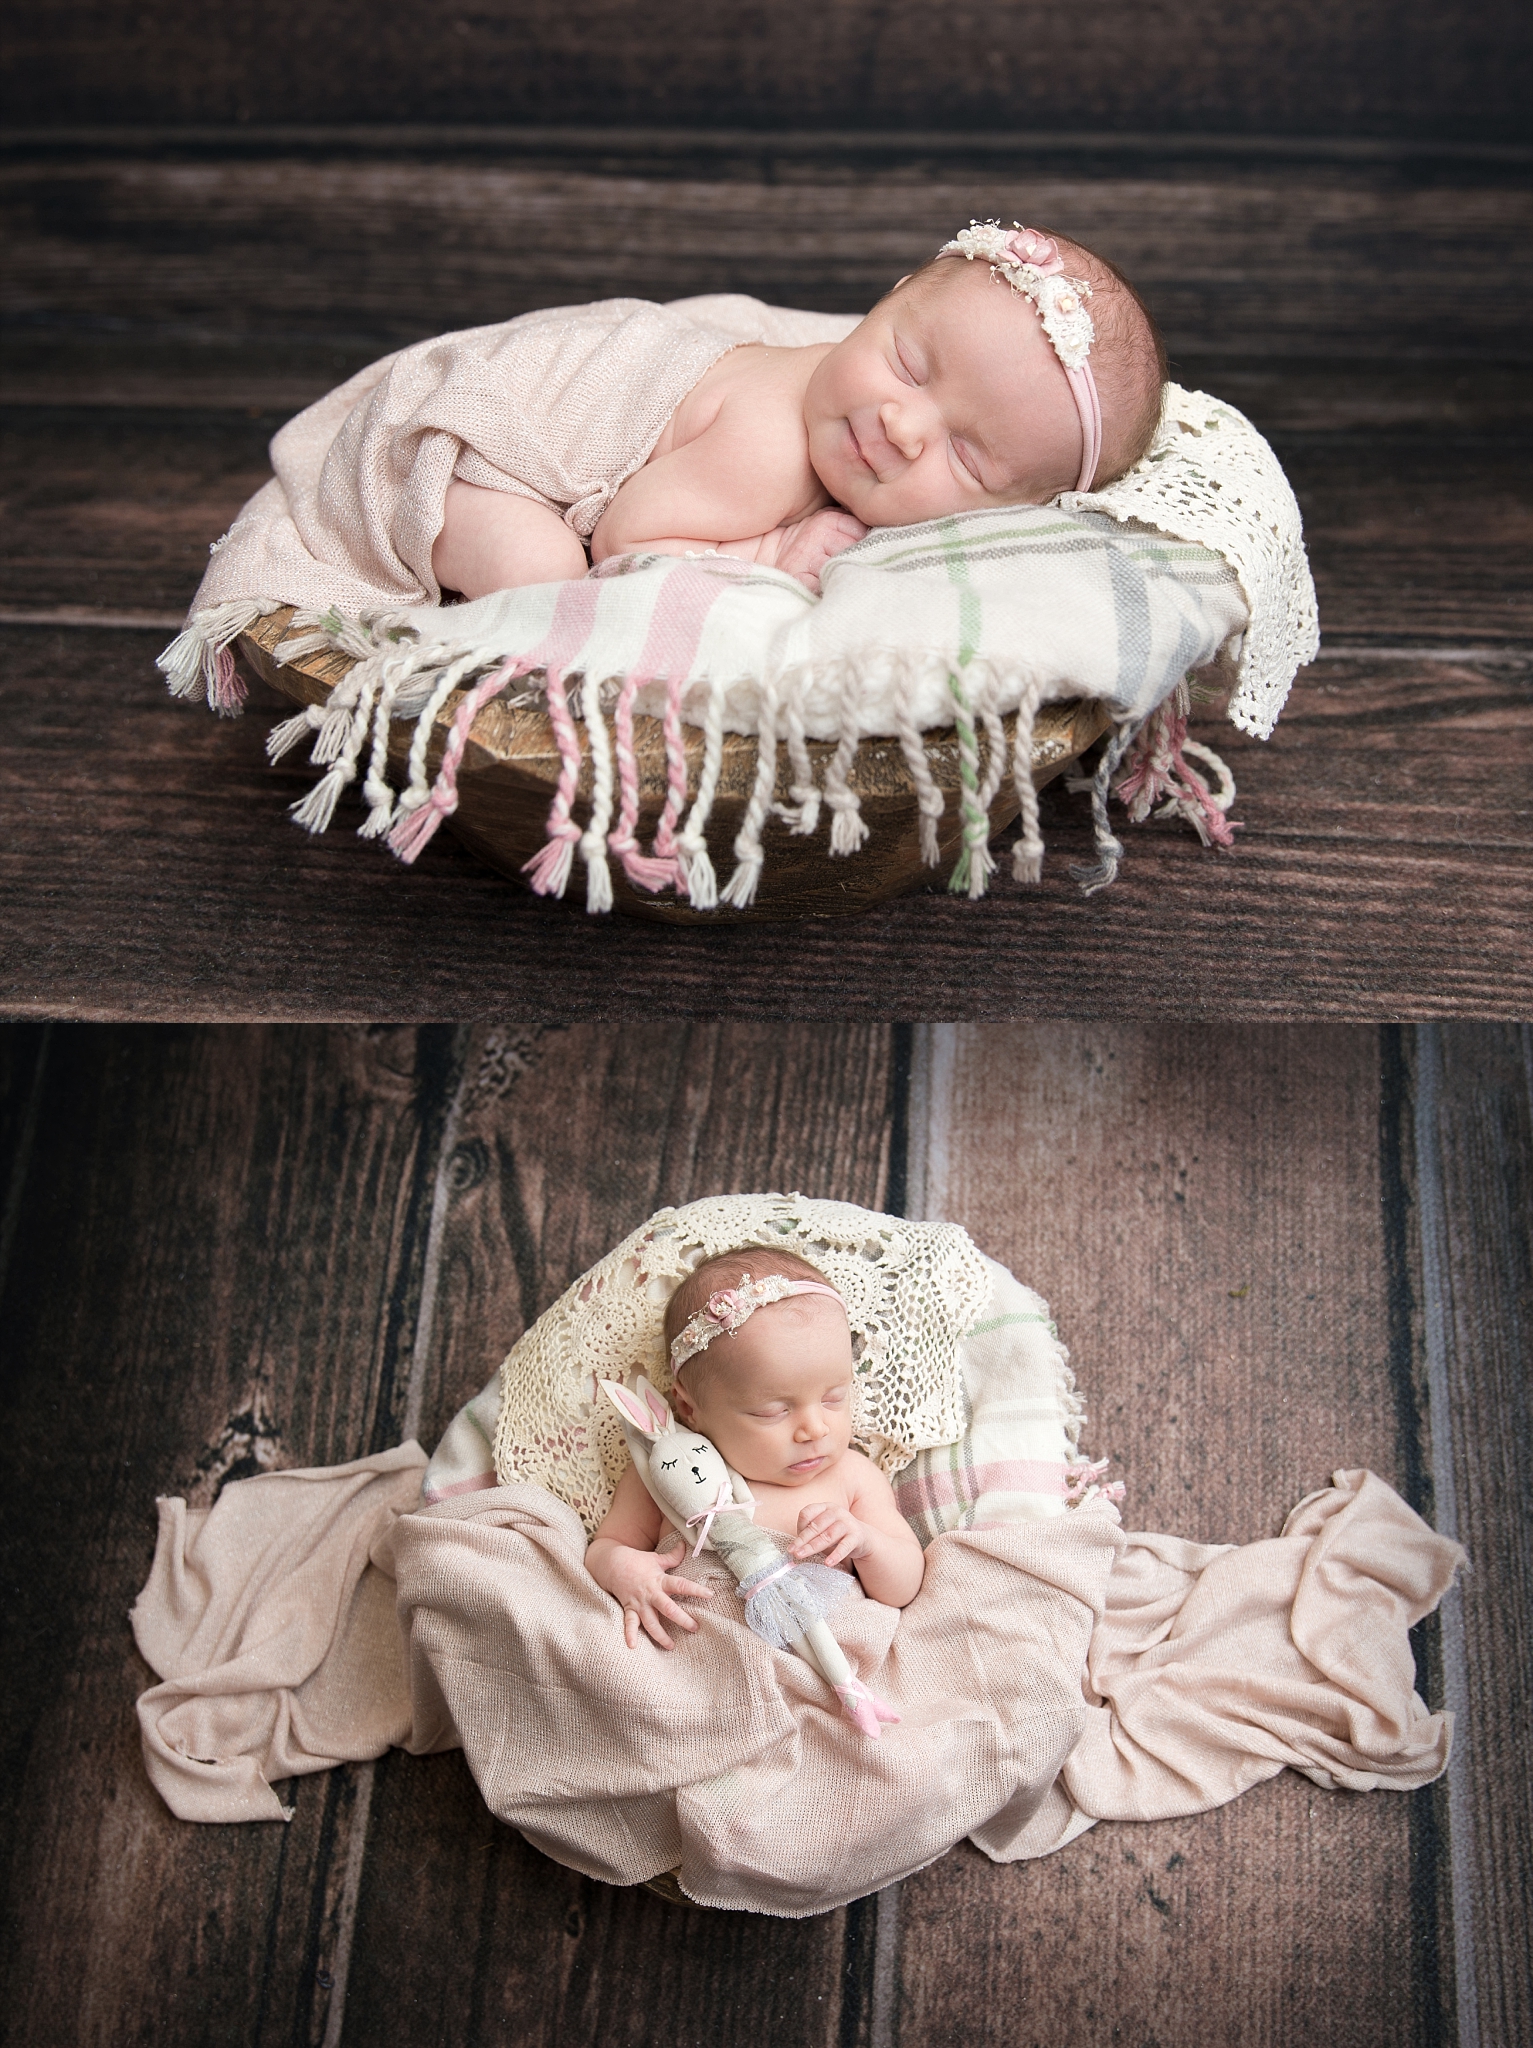 st-louis-newborn-photographer-collage-baby-girl-on-pink-plaid-blanket-with-wood-floor.jpg